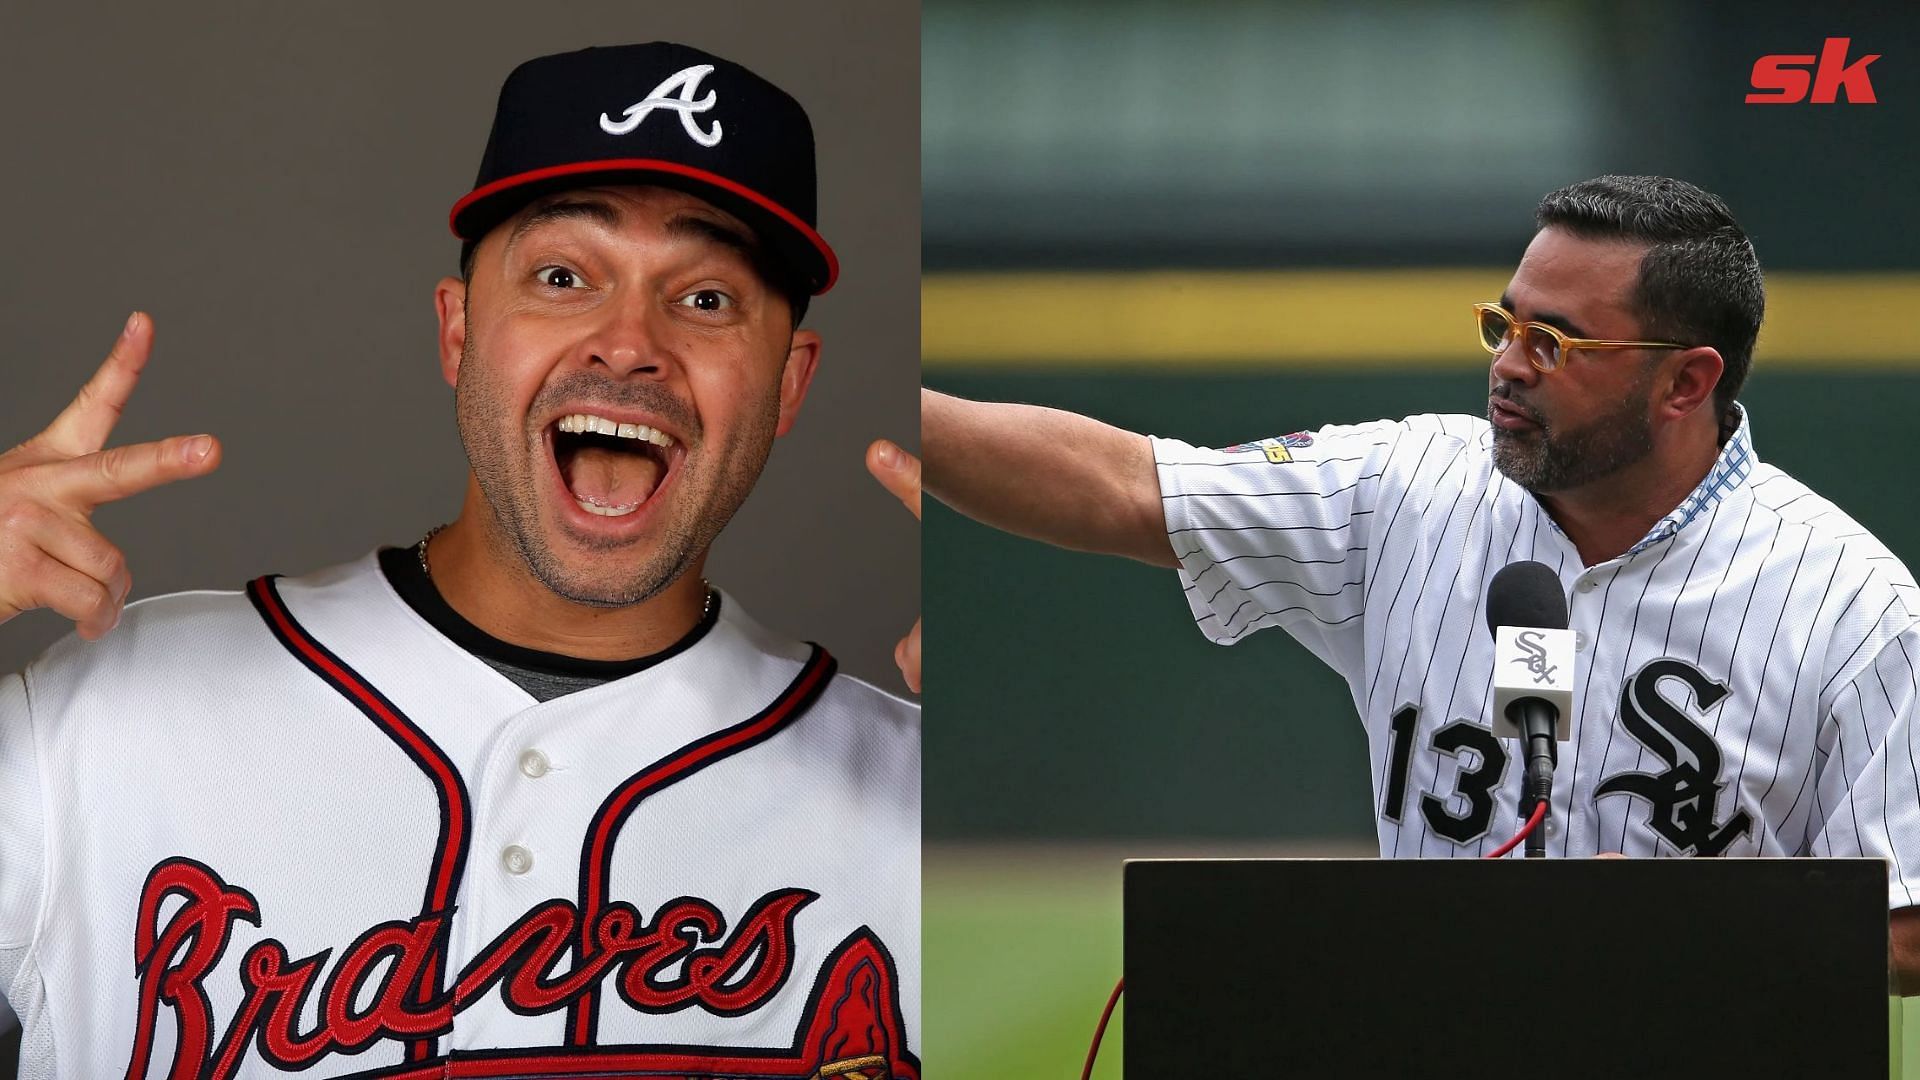 When Ozzie Guillen expressed his 'hate' for Nick Swisher owing to the  Yankees star's 'fake attitude